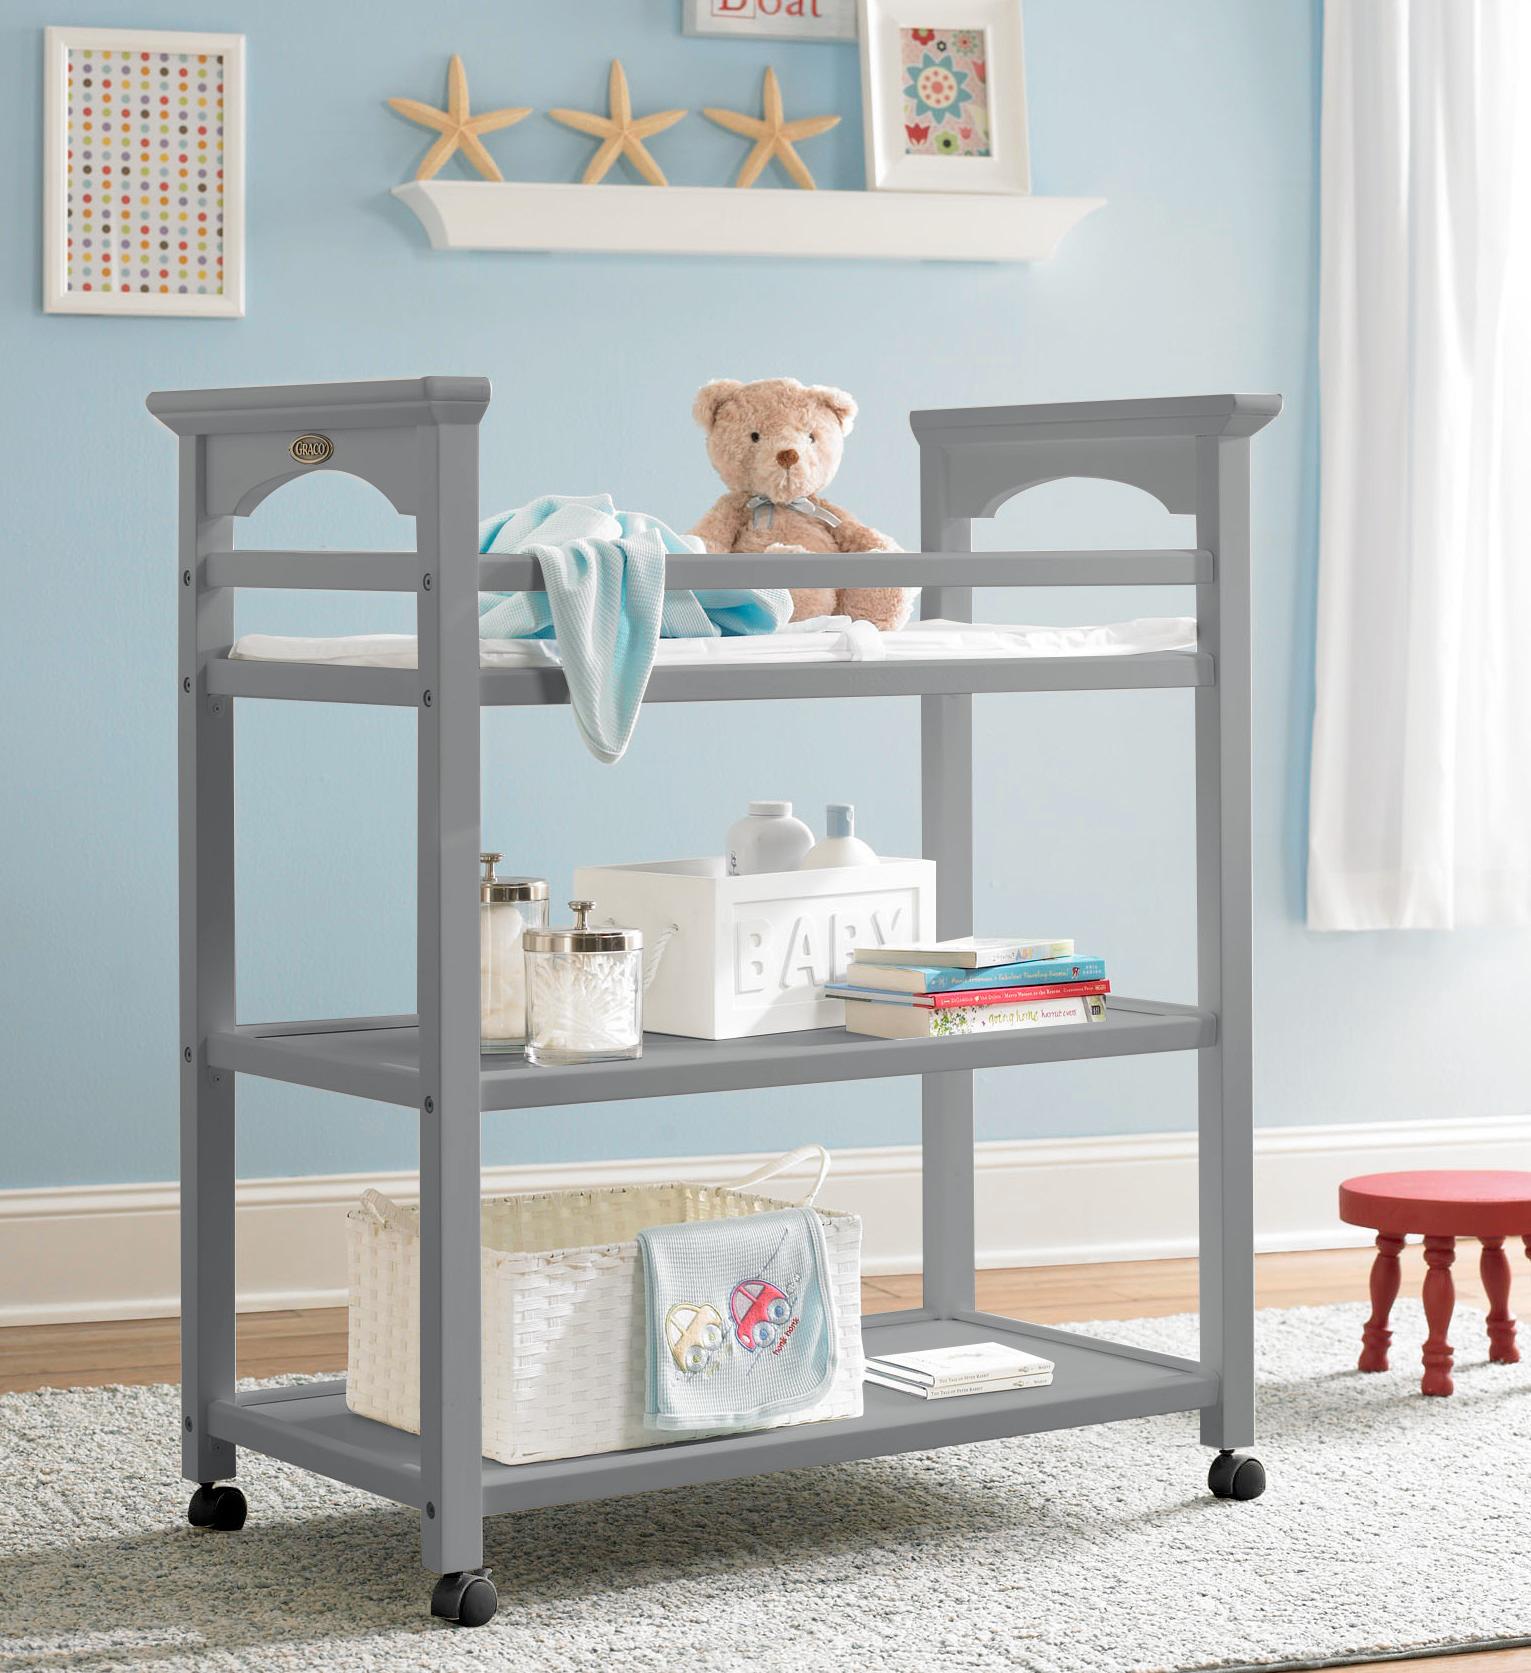 graco lauren crib with changing table manual